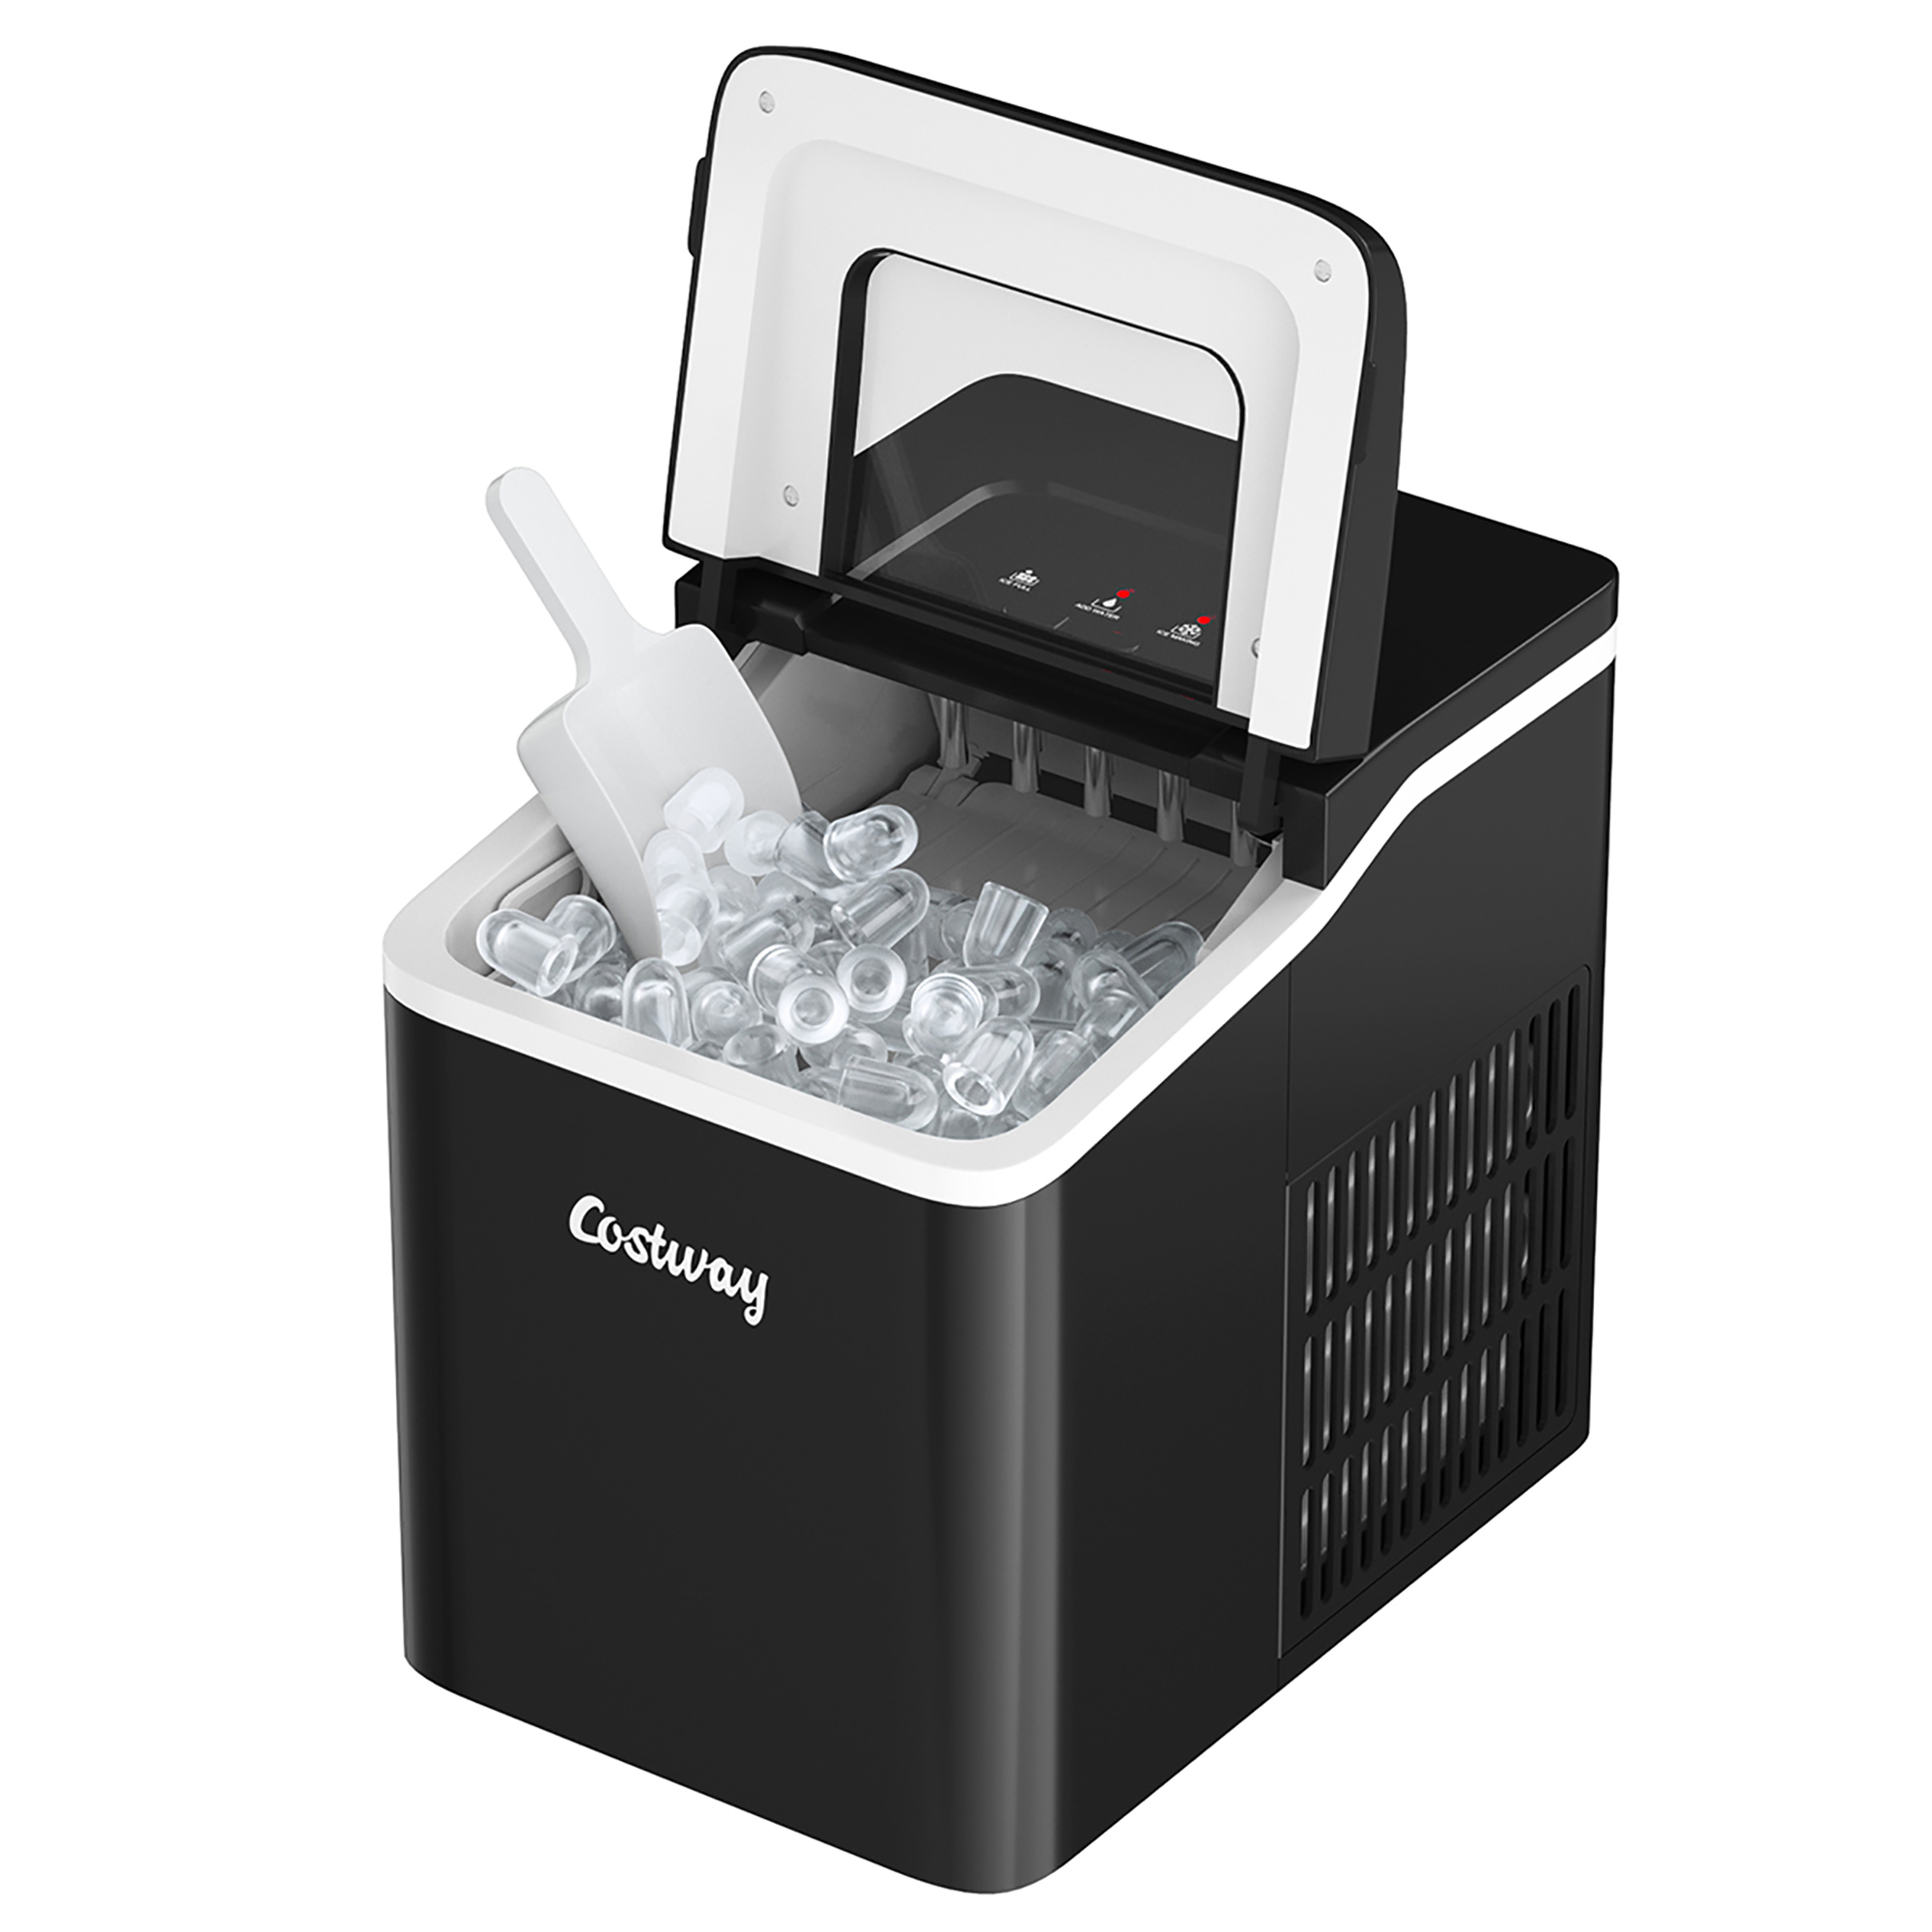 Costway Portable Ice Maker Machine Countertop 26Lbs/24H Self-cleaning w/ Scoop Black - image 10 of 10